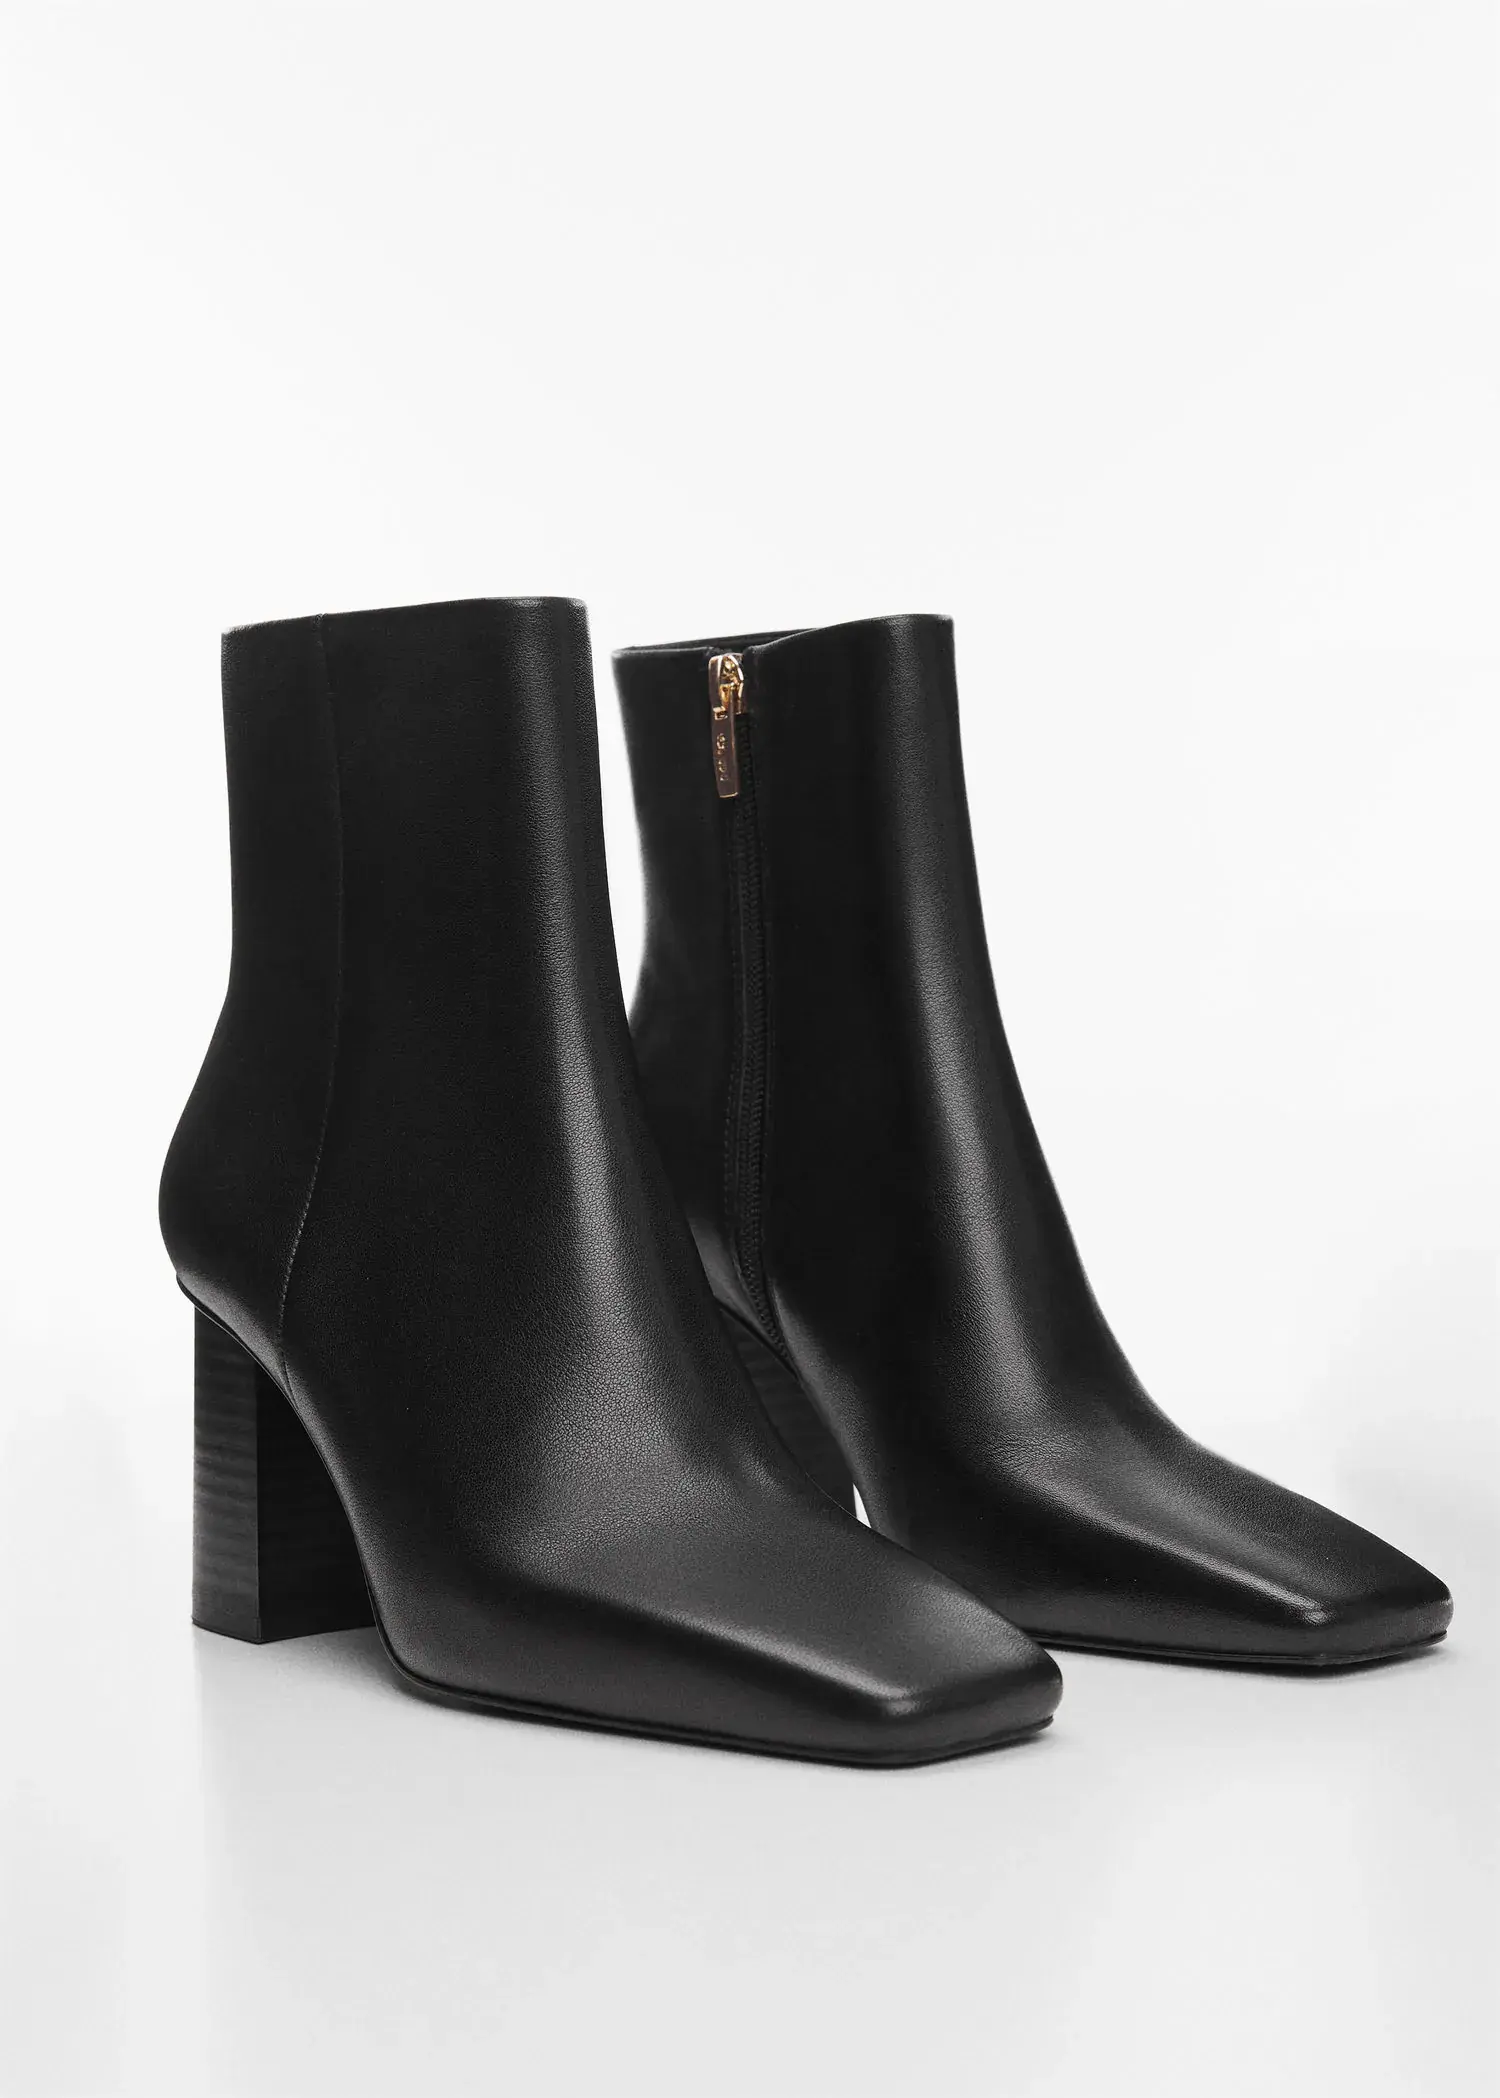 Mango Squared toe leather ankle boots. 1